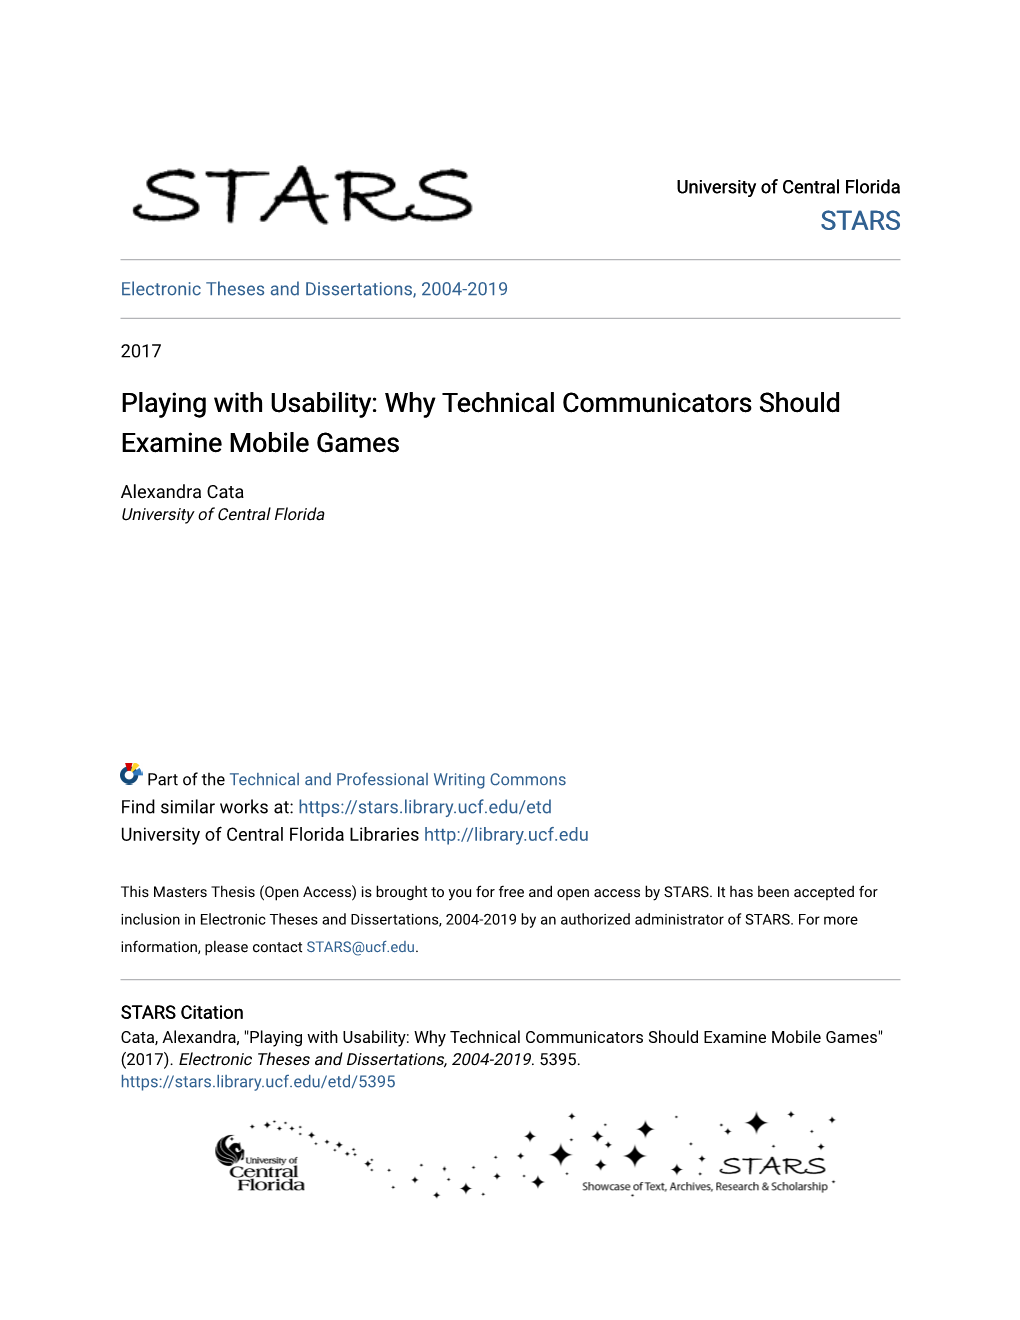 Playing with Usability: Why Technical Communicators Should Examine Mobile Games